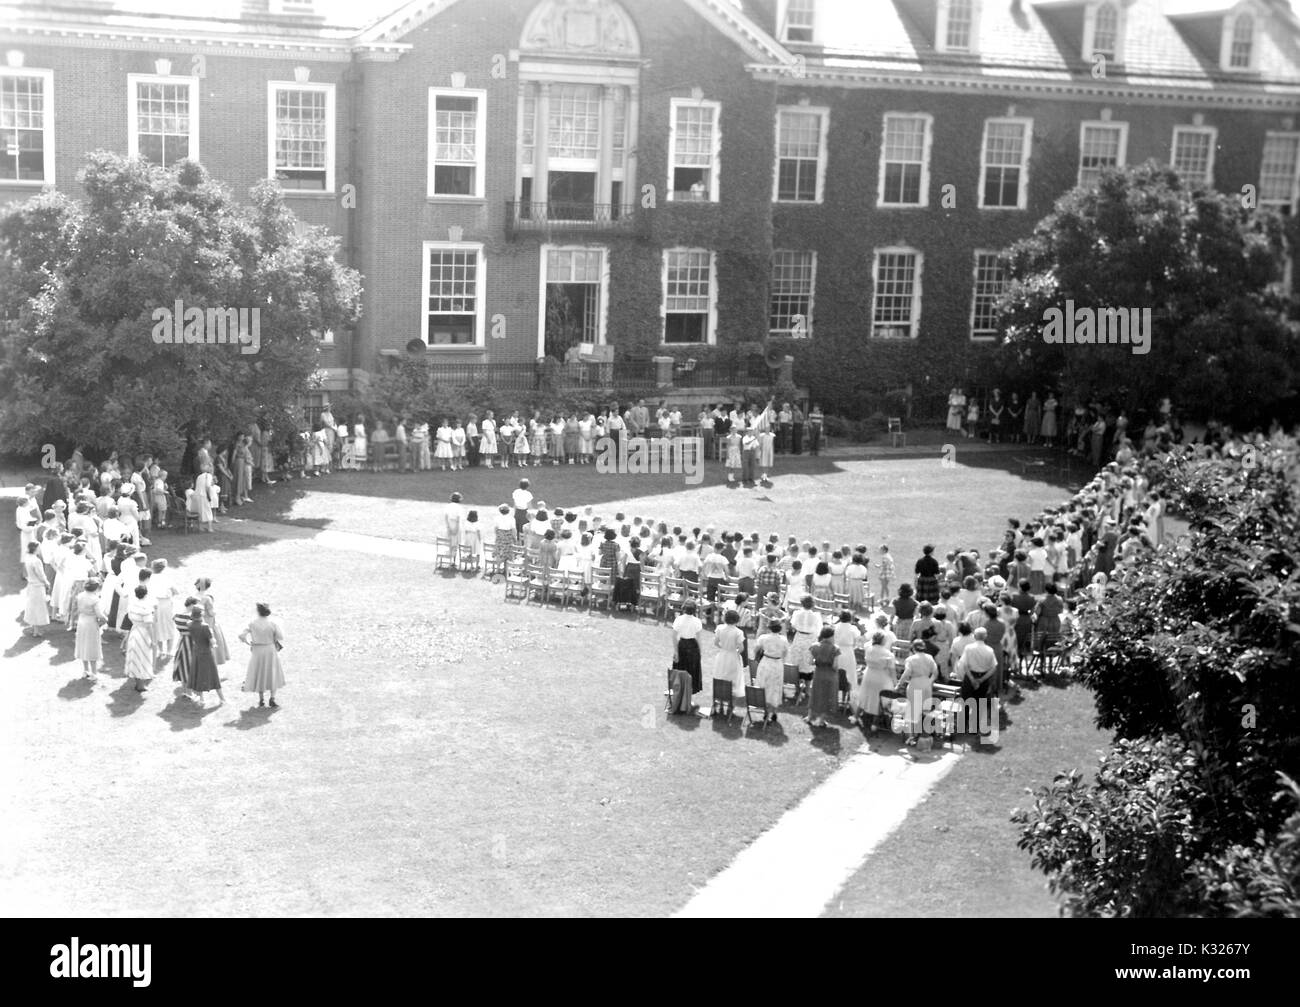 At the end of the school year for a demonstration school at Johns Hopkins University, parents and teachers stand in front of rows of chairs outside of an ivy-covered campus building, waiting for the young boys and girls to begin the show they will perform to close out the year, in the grass on the quadrangle on a sunny day, Baltimore, Maryland, July, 1950. Stock Photo